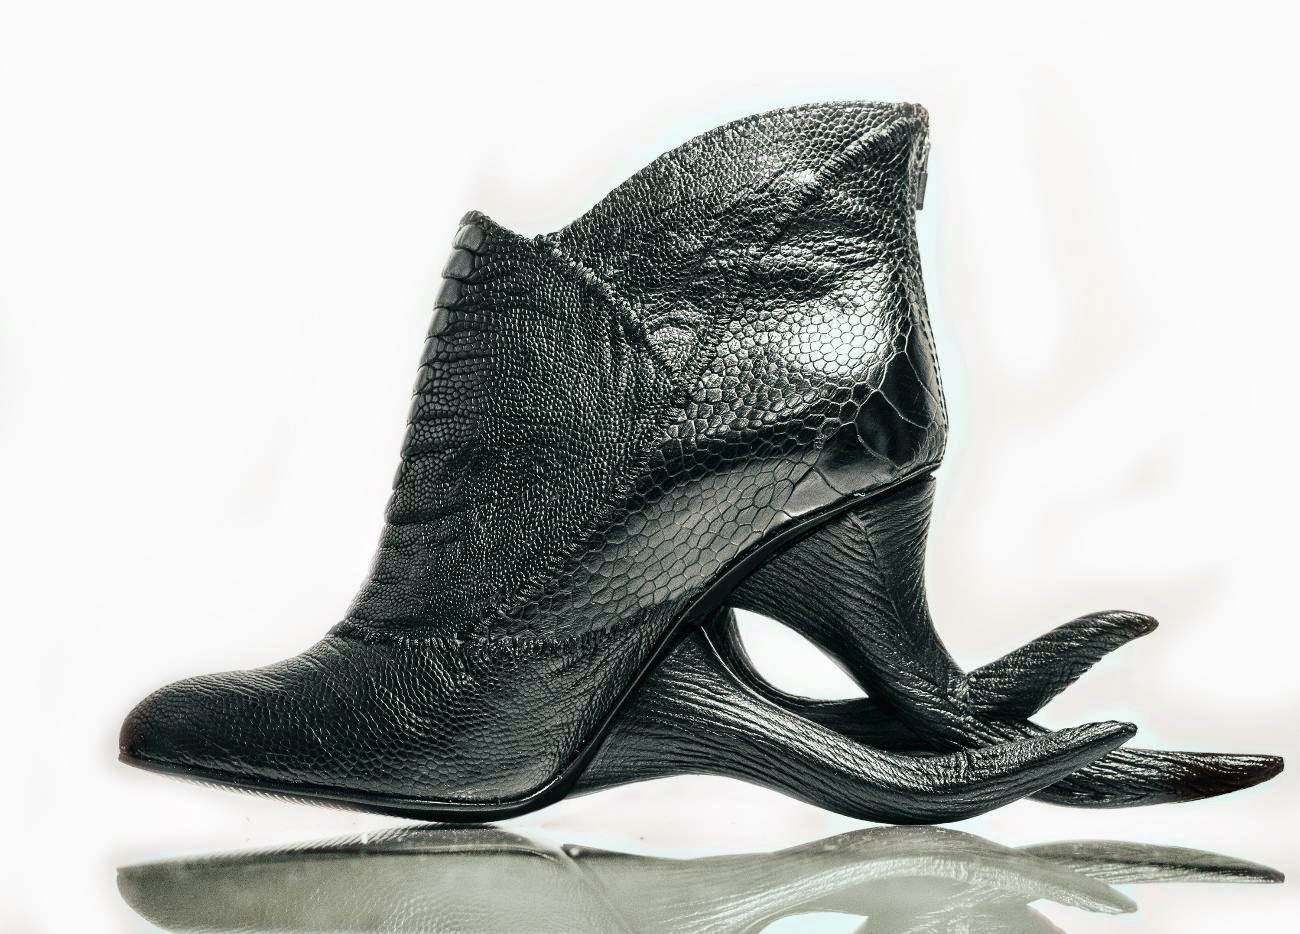 Simply Creative: Incredible Shoe Creations by Anastasia Radevich